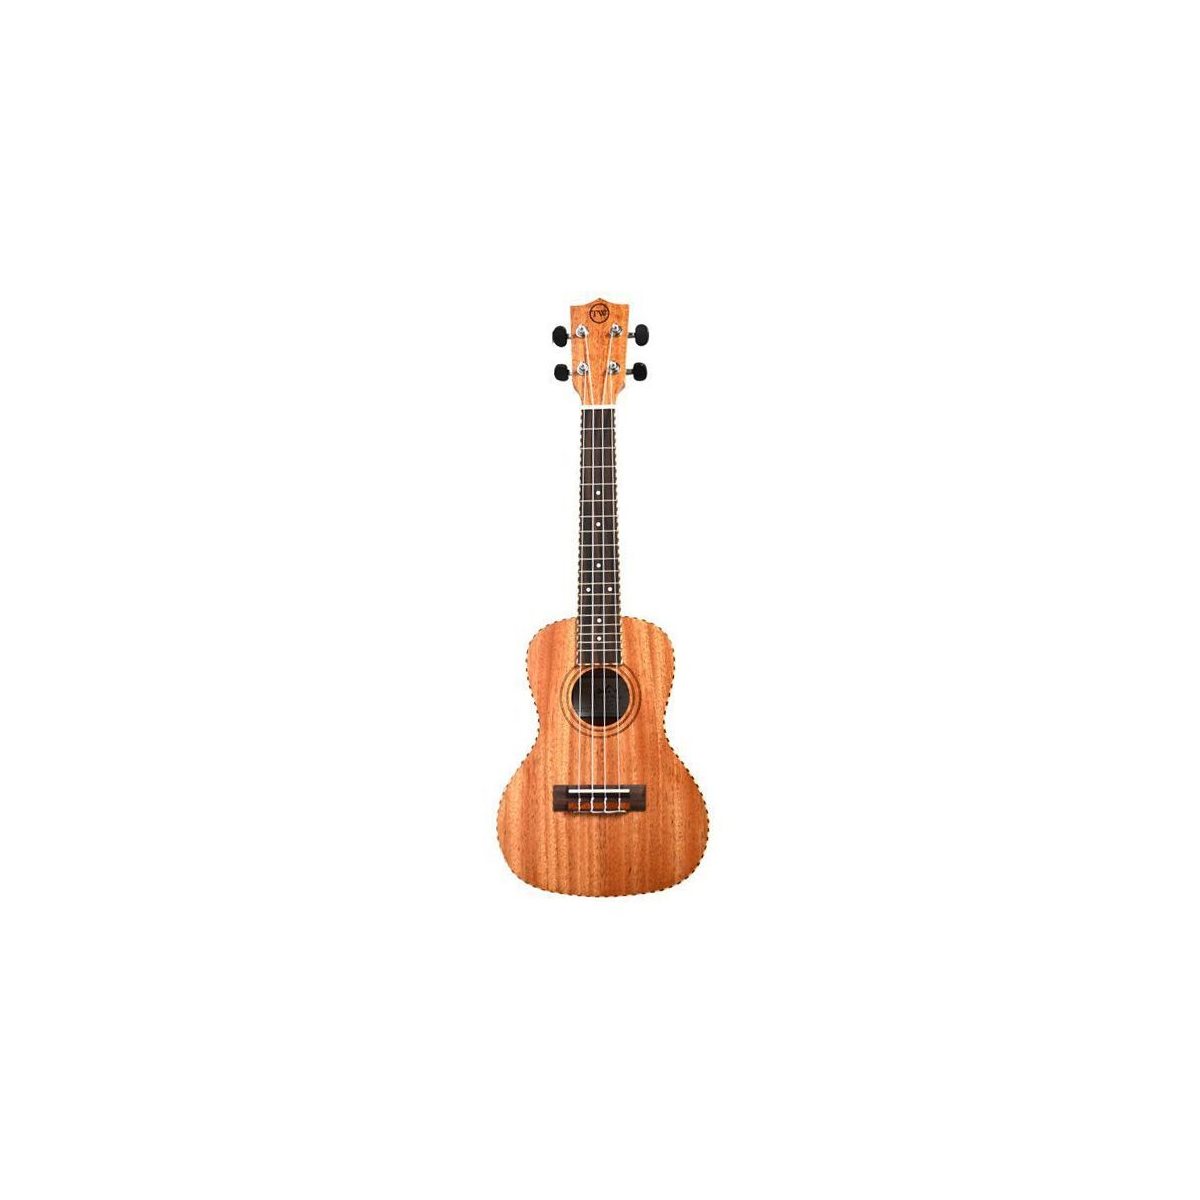 TWISTED WOOD - TO-100S - UKULÉLÉ SOPRANO